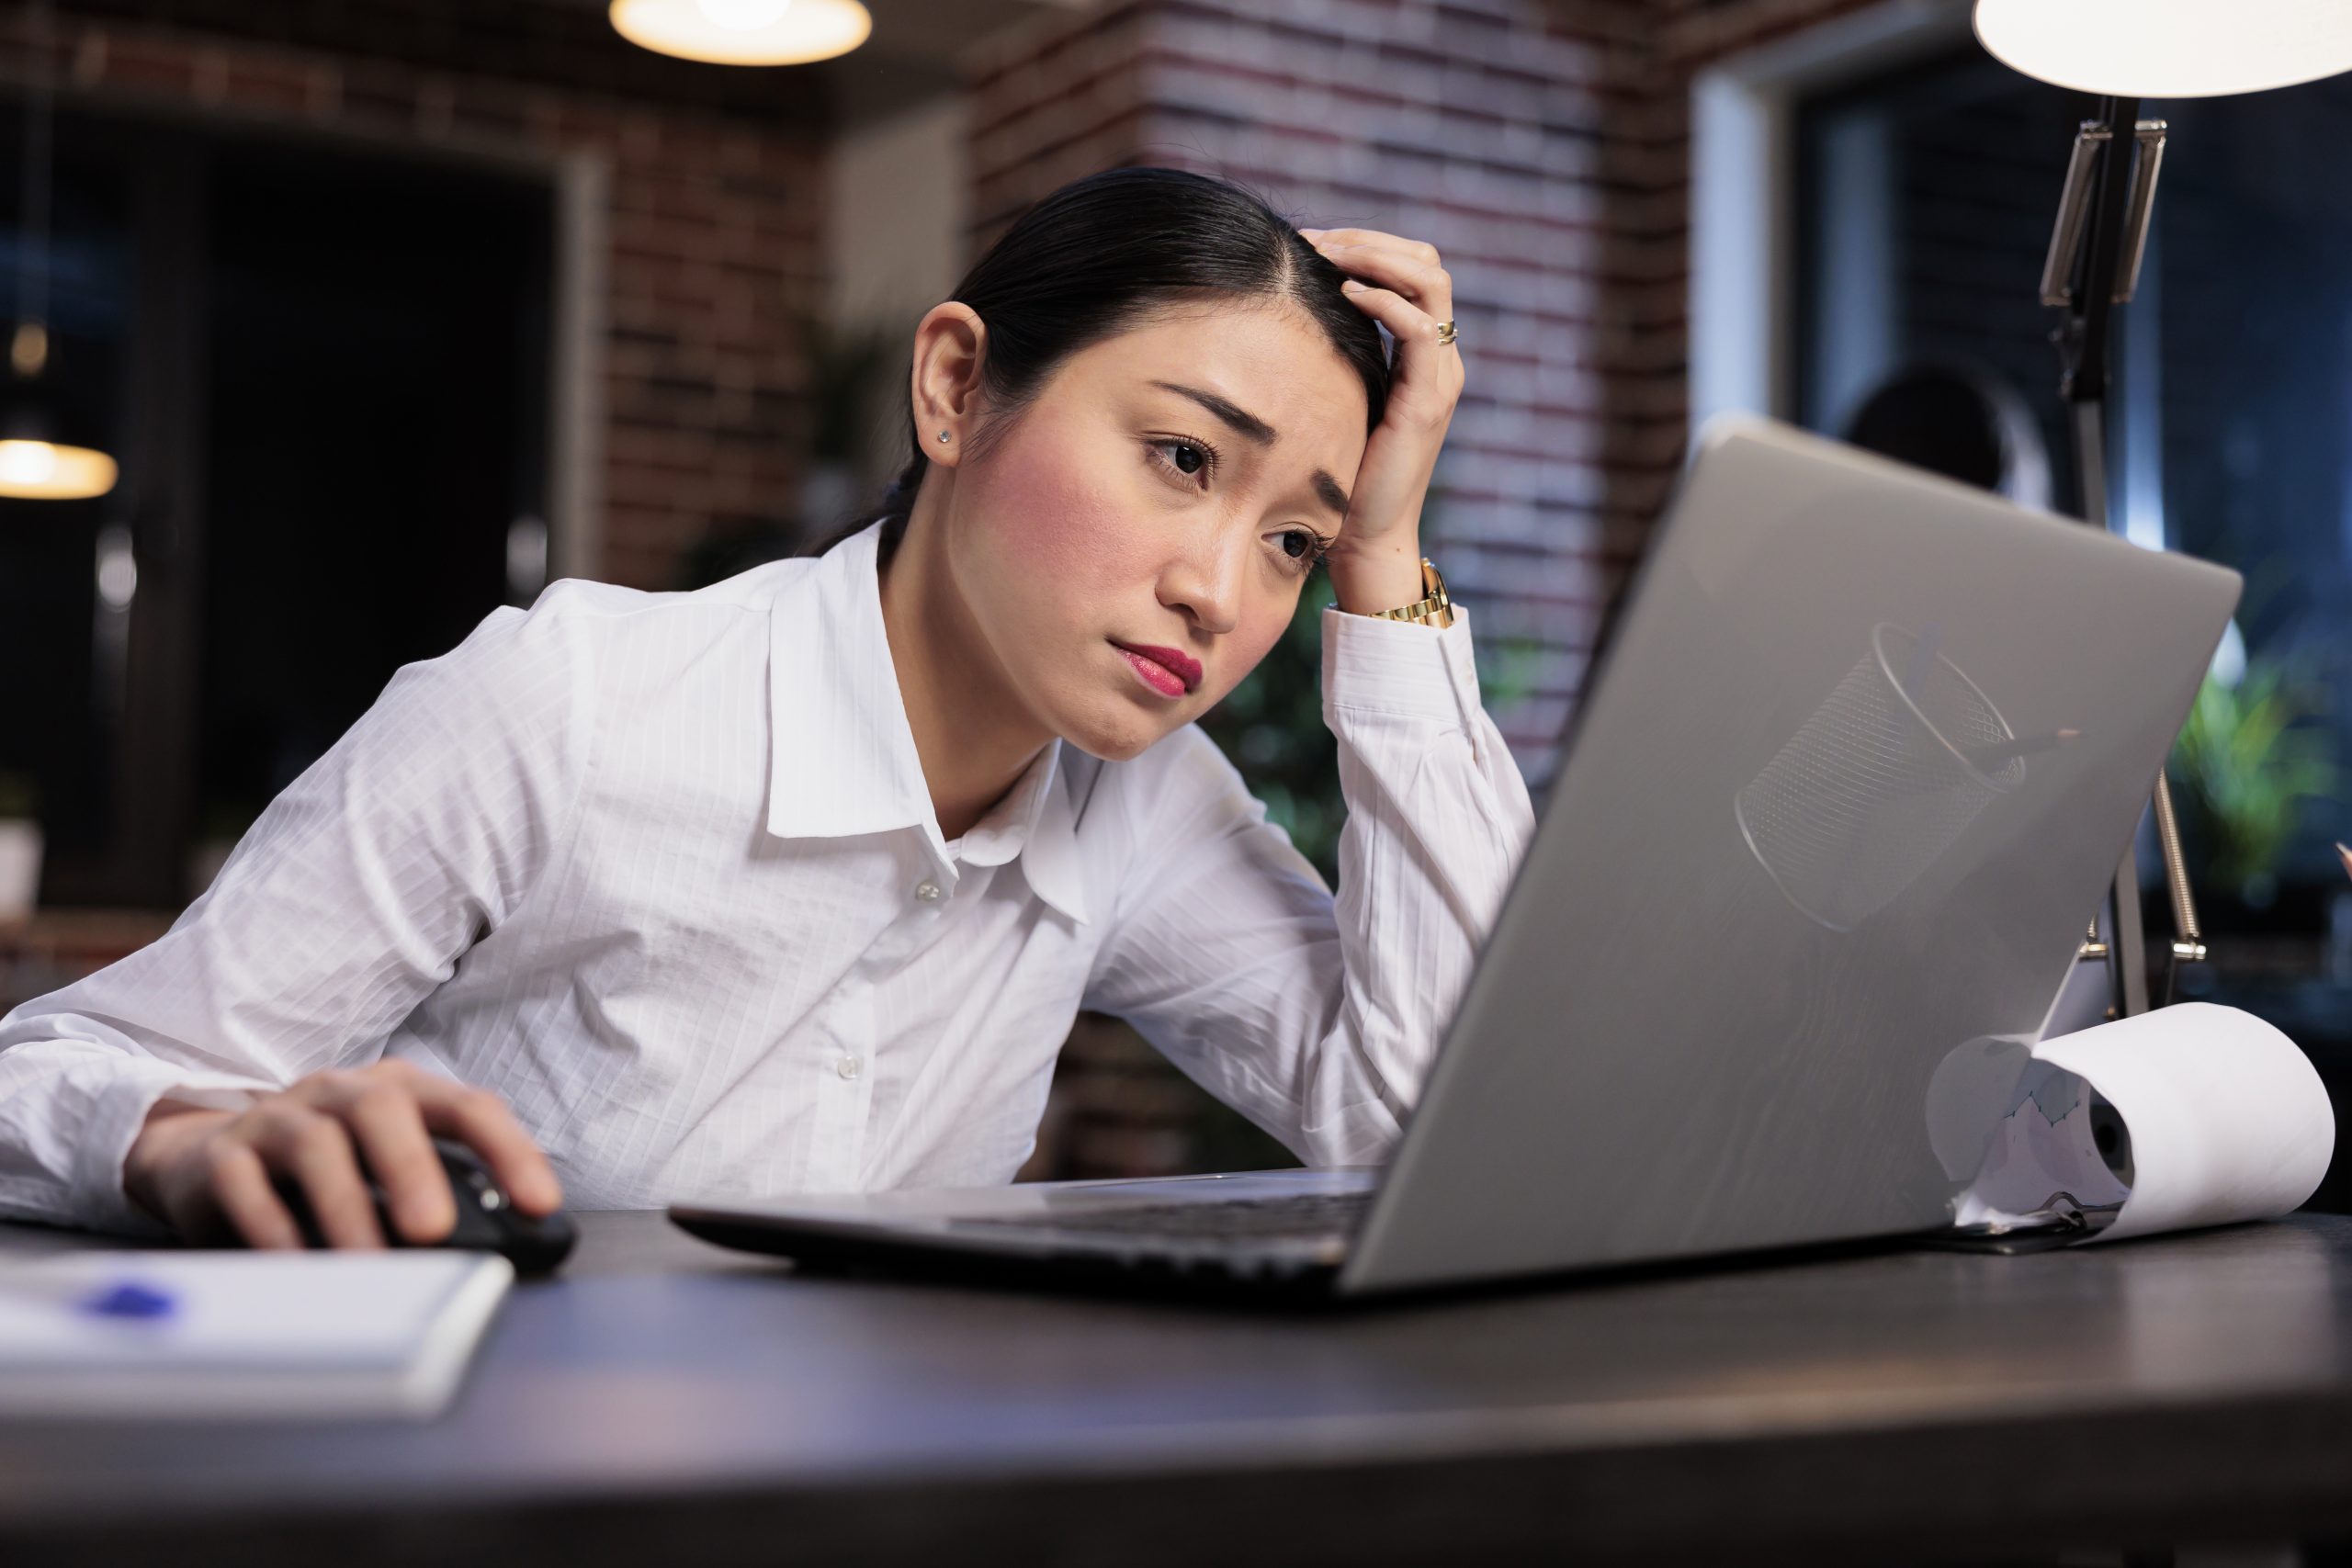 Stressed woman facing her laptop.